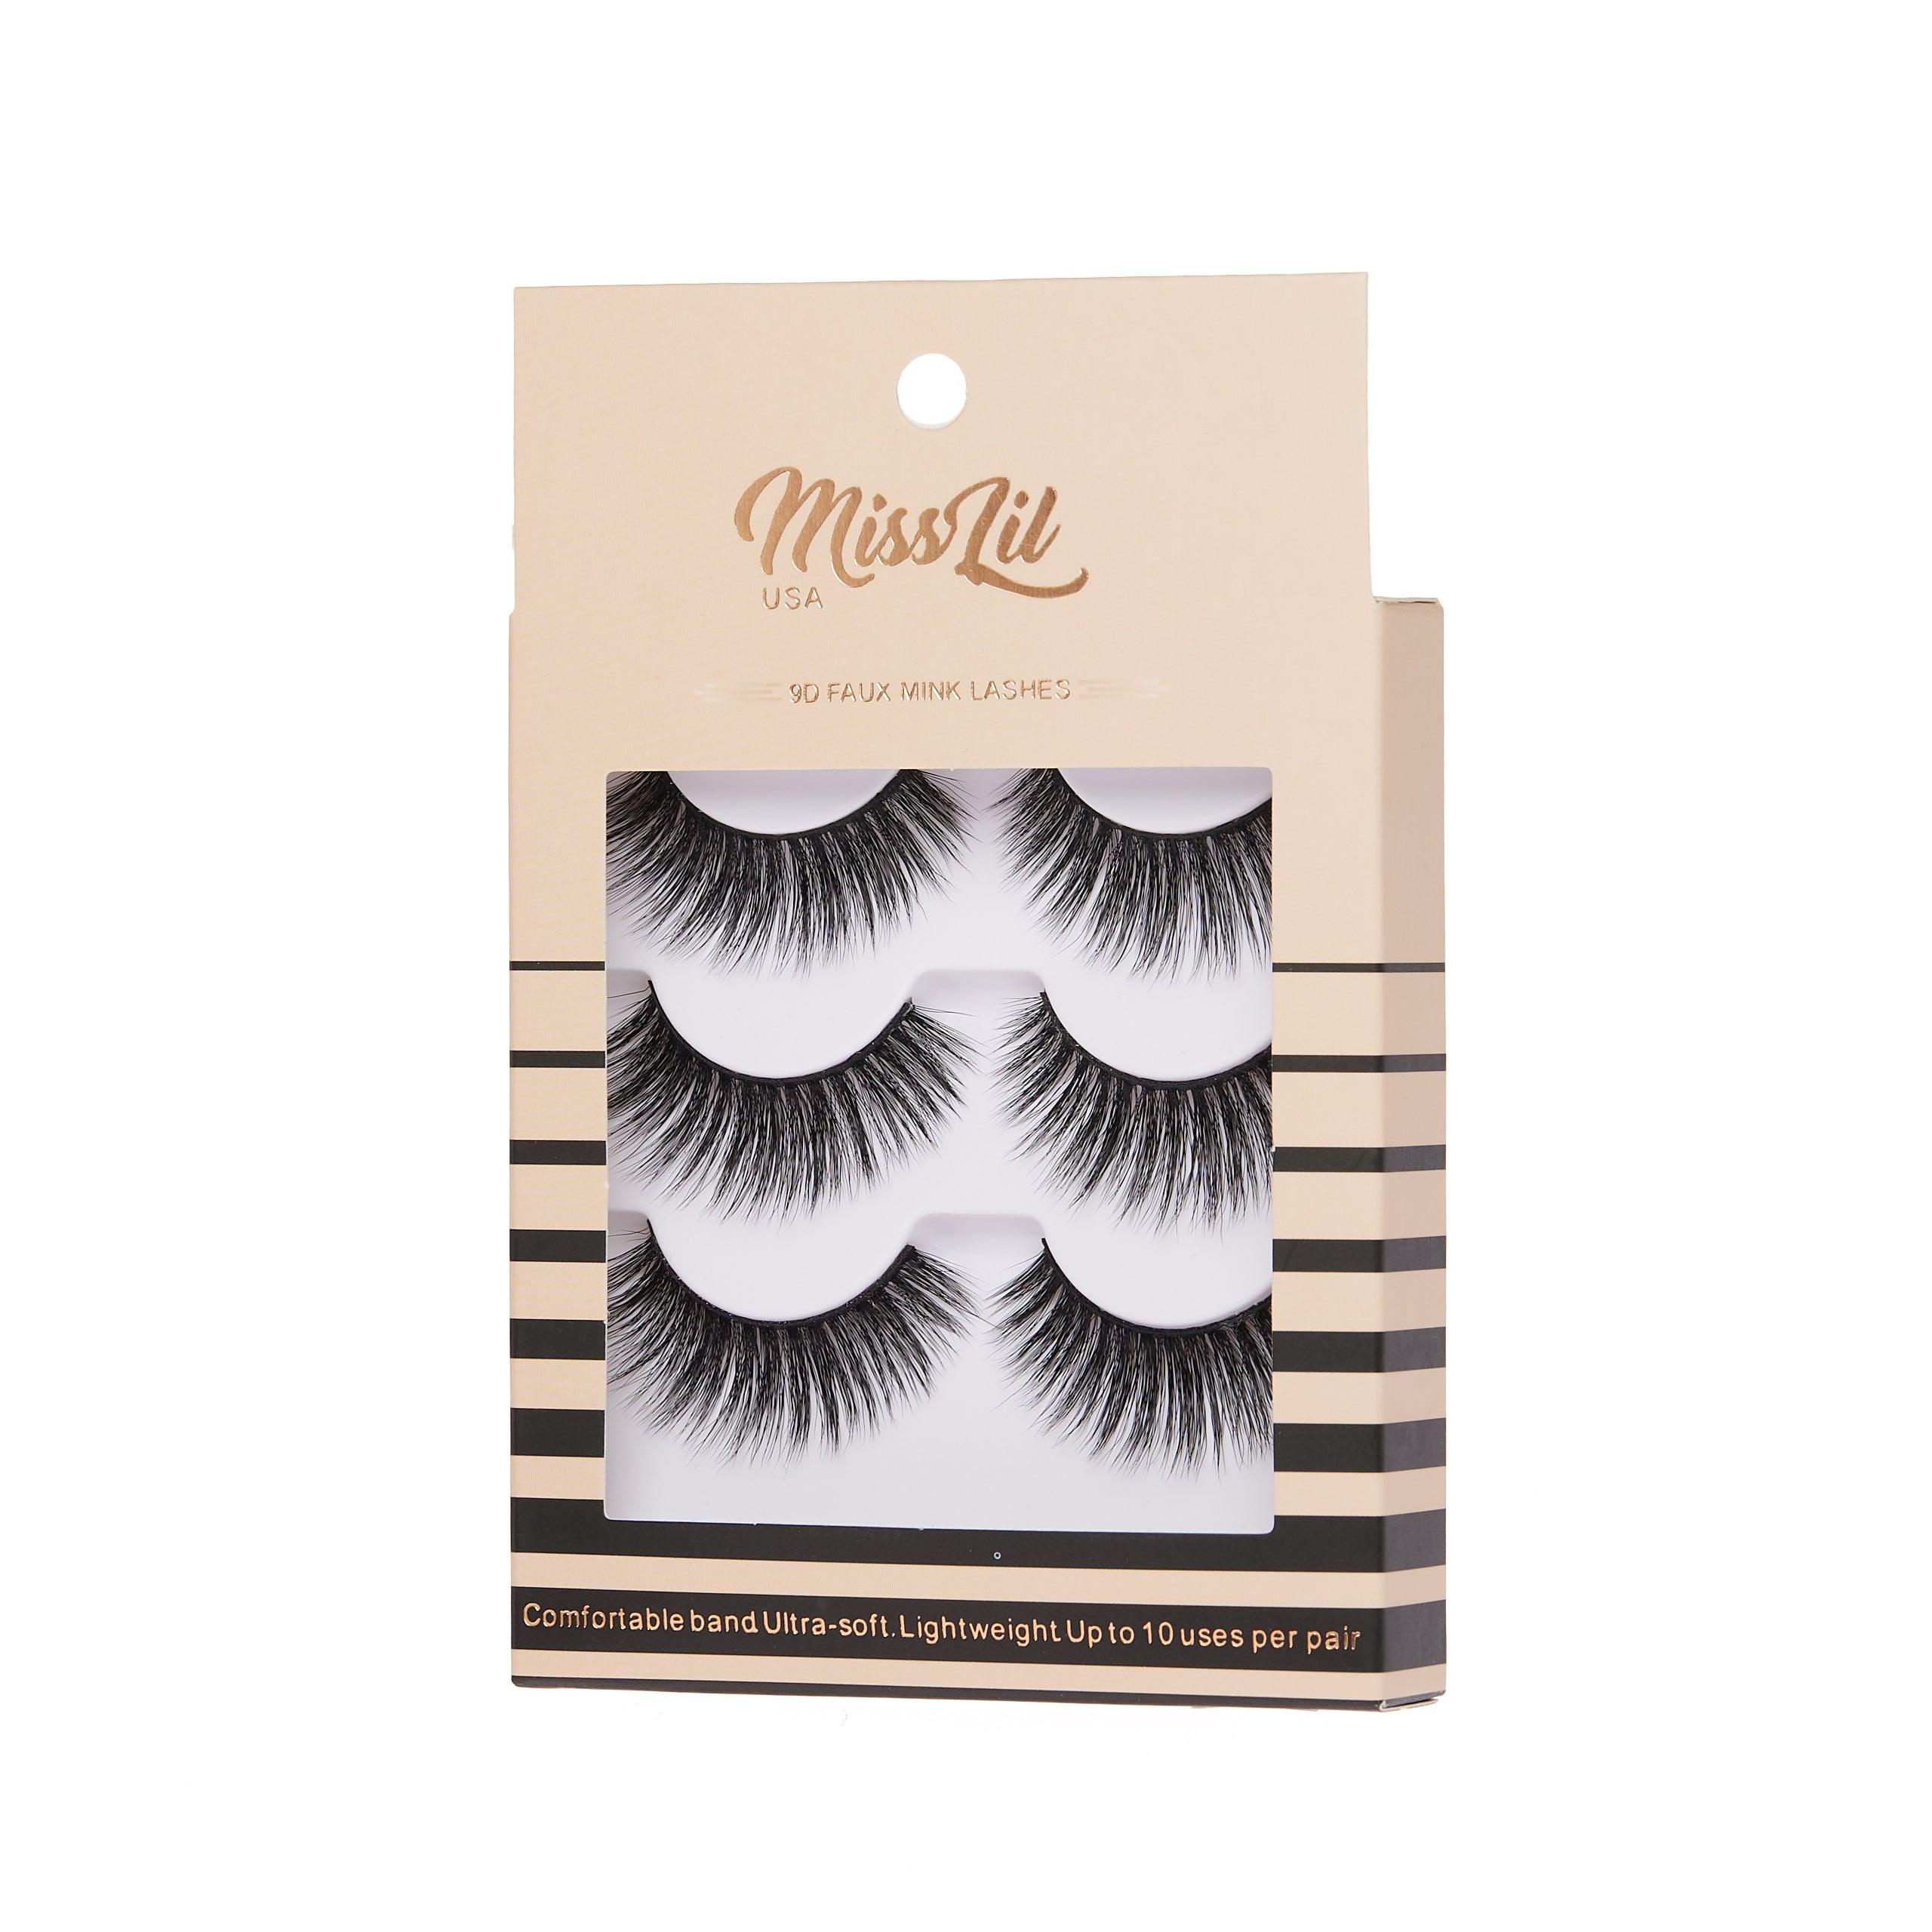 3-Pair Faux 9D Mink Eyelashes - Luxury Collection #21 - Pack of 3 - Miss Lil USA